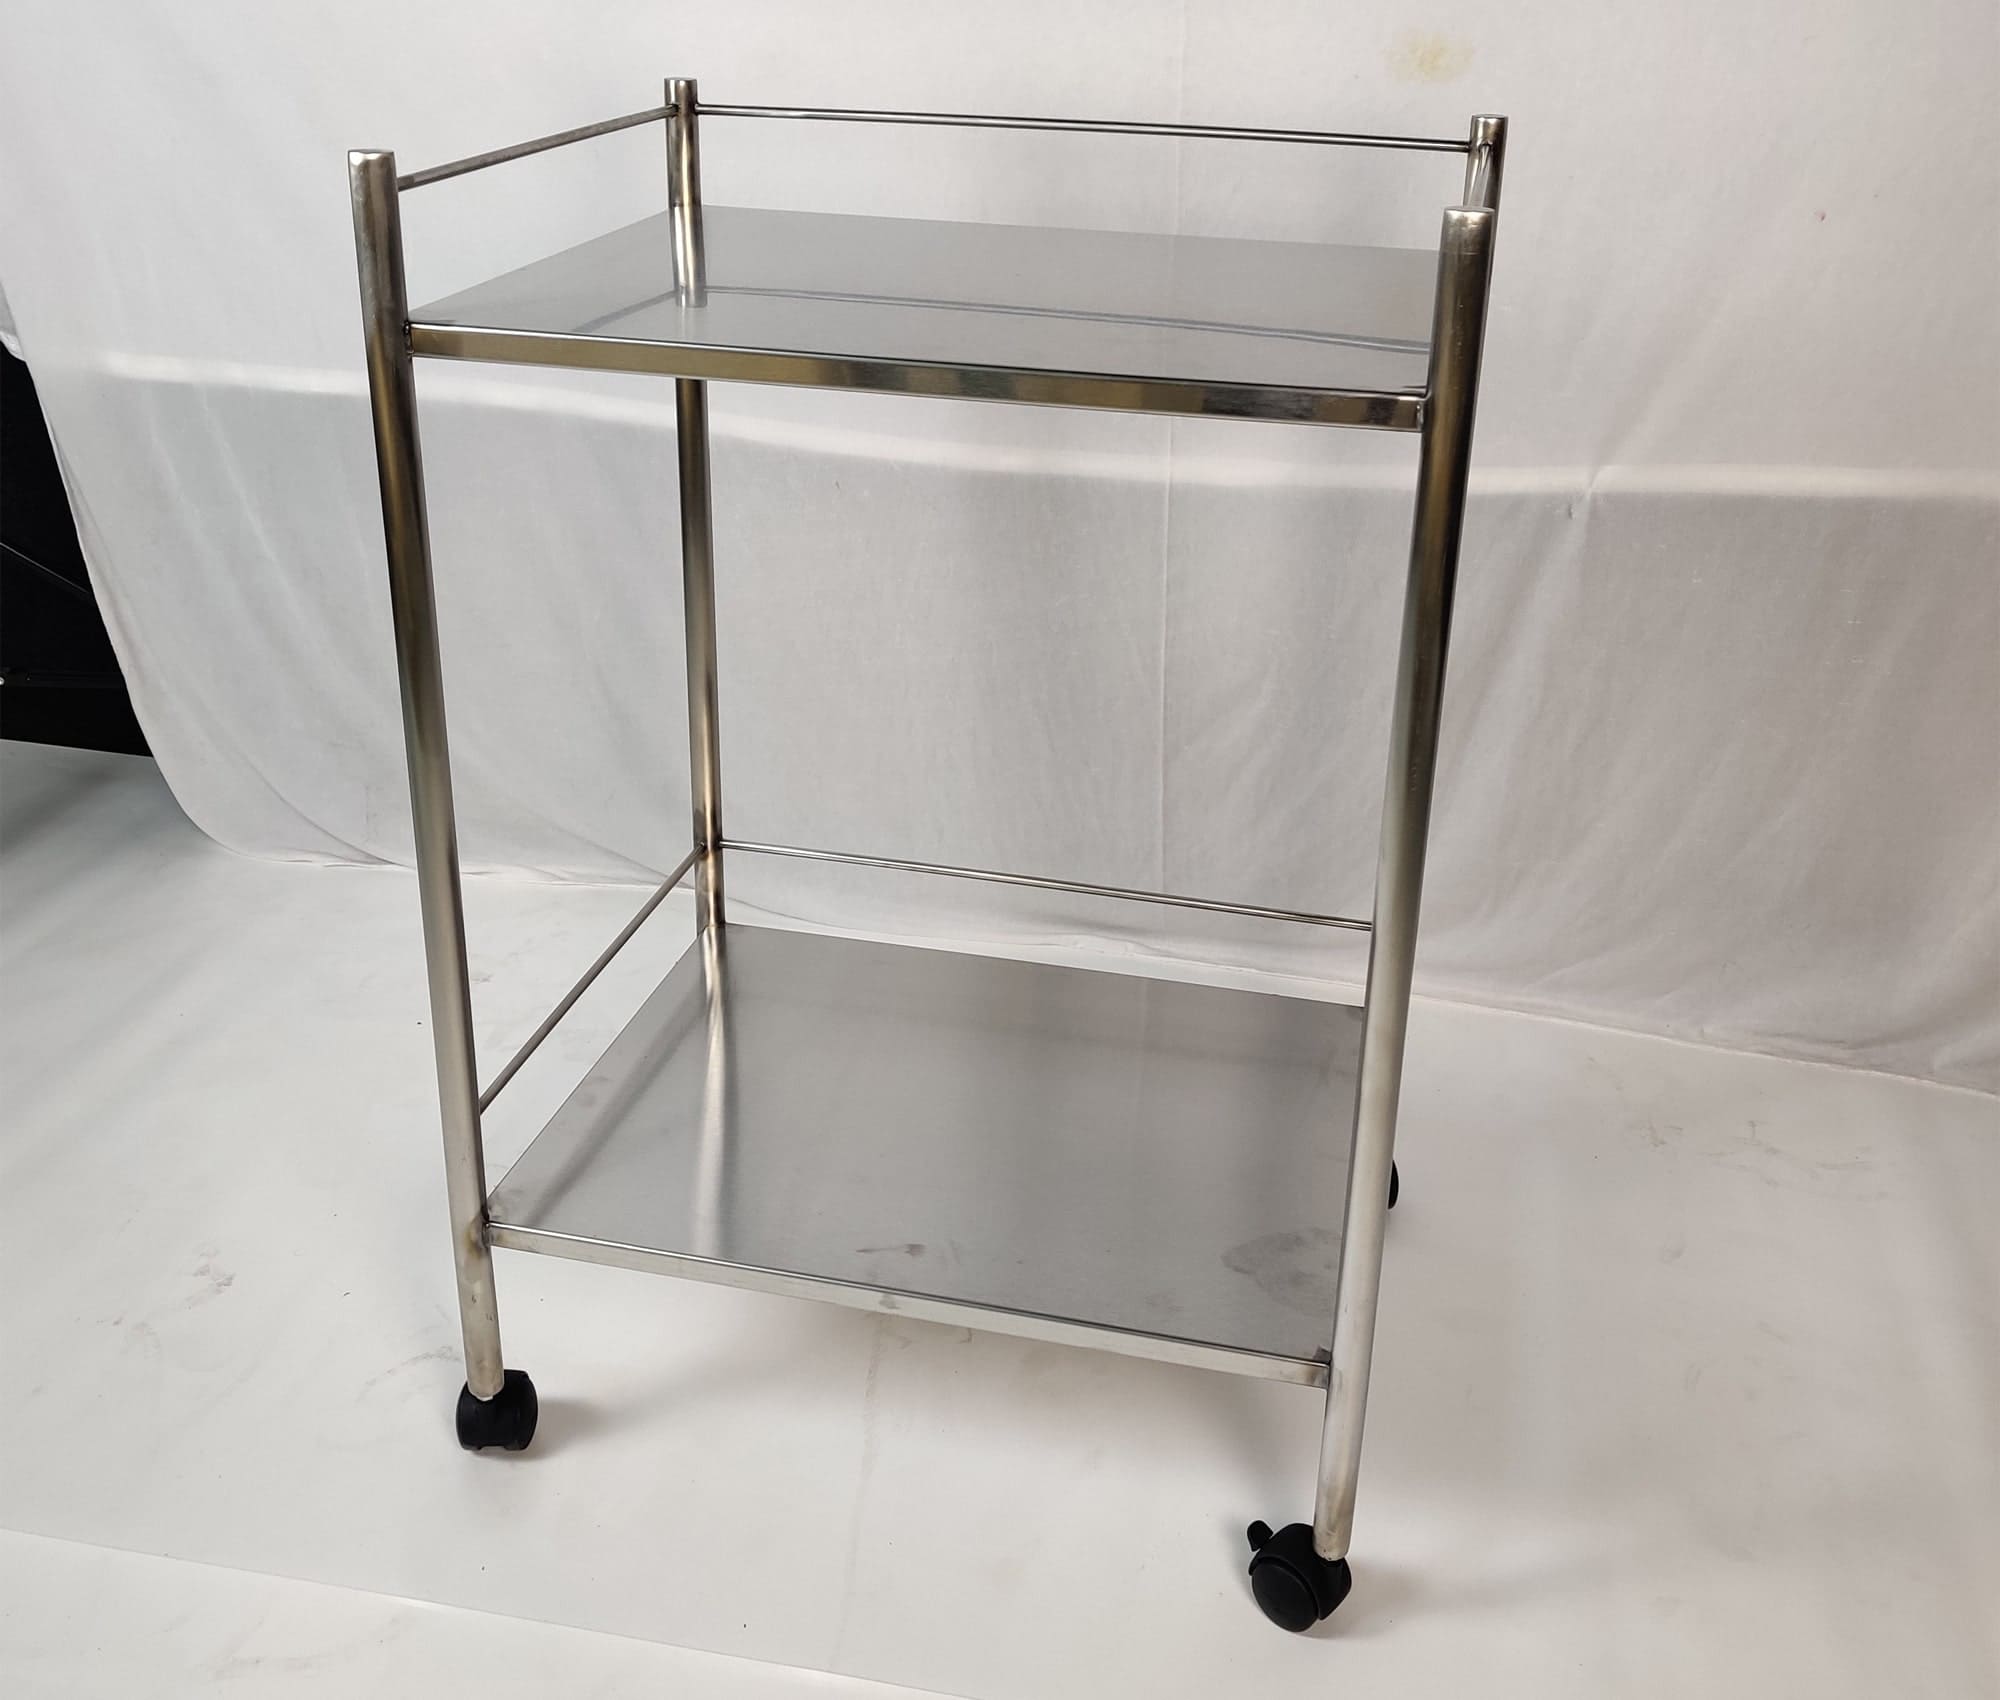 Hospital Trolley Manufacturers in India